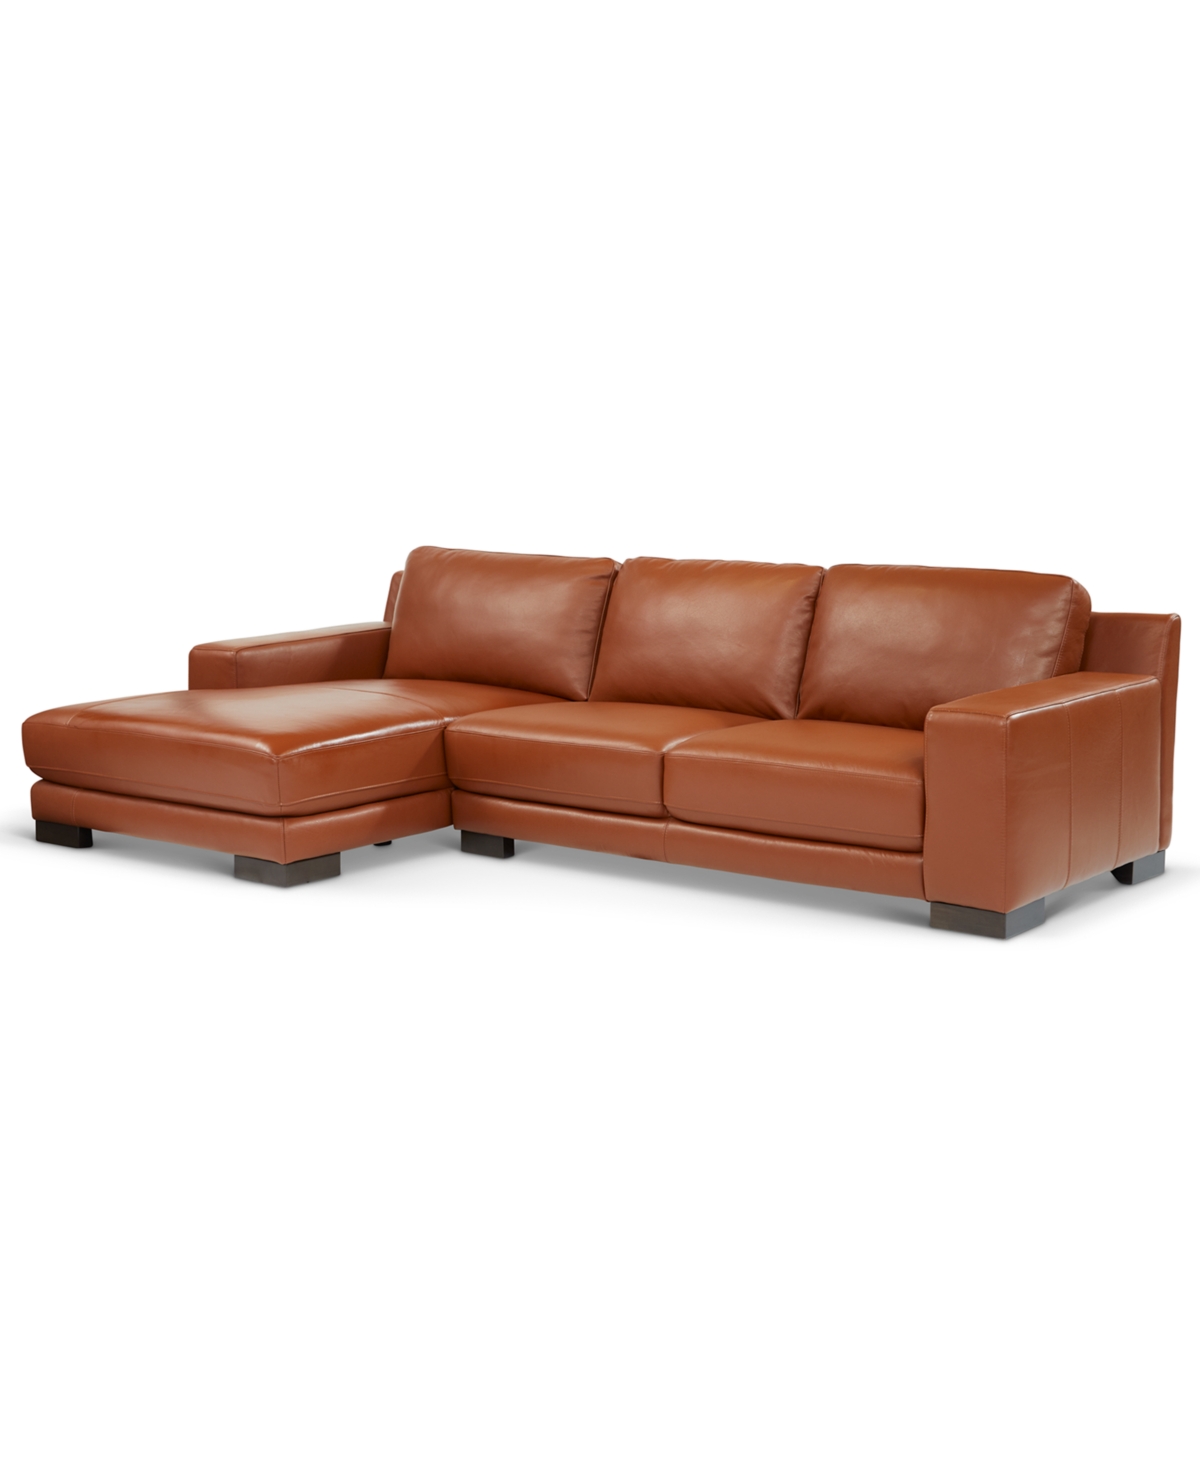 Macy's Darrium 2-pc. Leather Sofa With Chaise, Created For  In Cognac